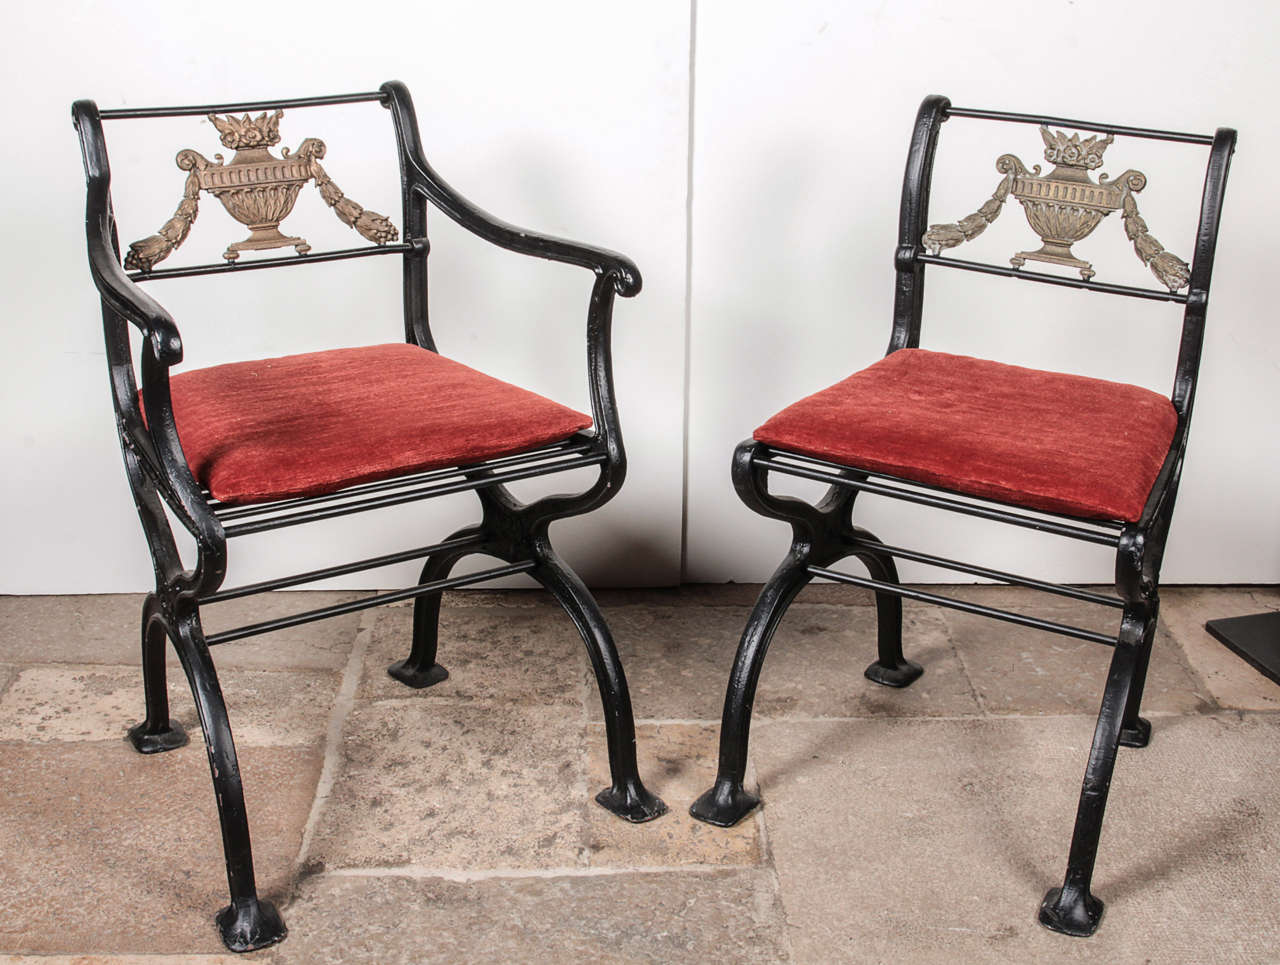 Set of Cast Iron and Bronze Garden Furniture In Excellent Condition For Sale In New York, NY